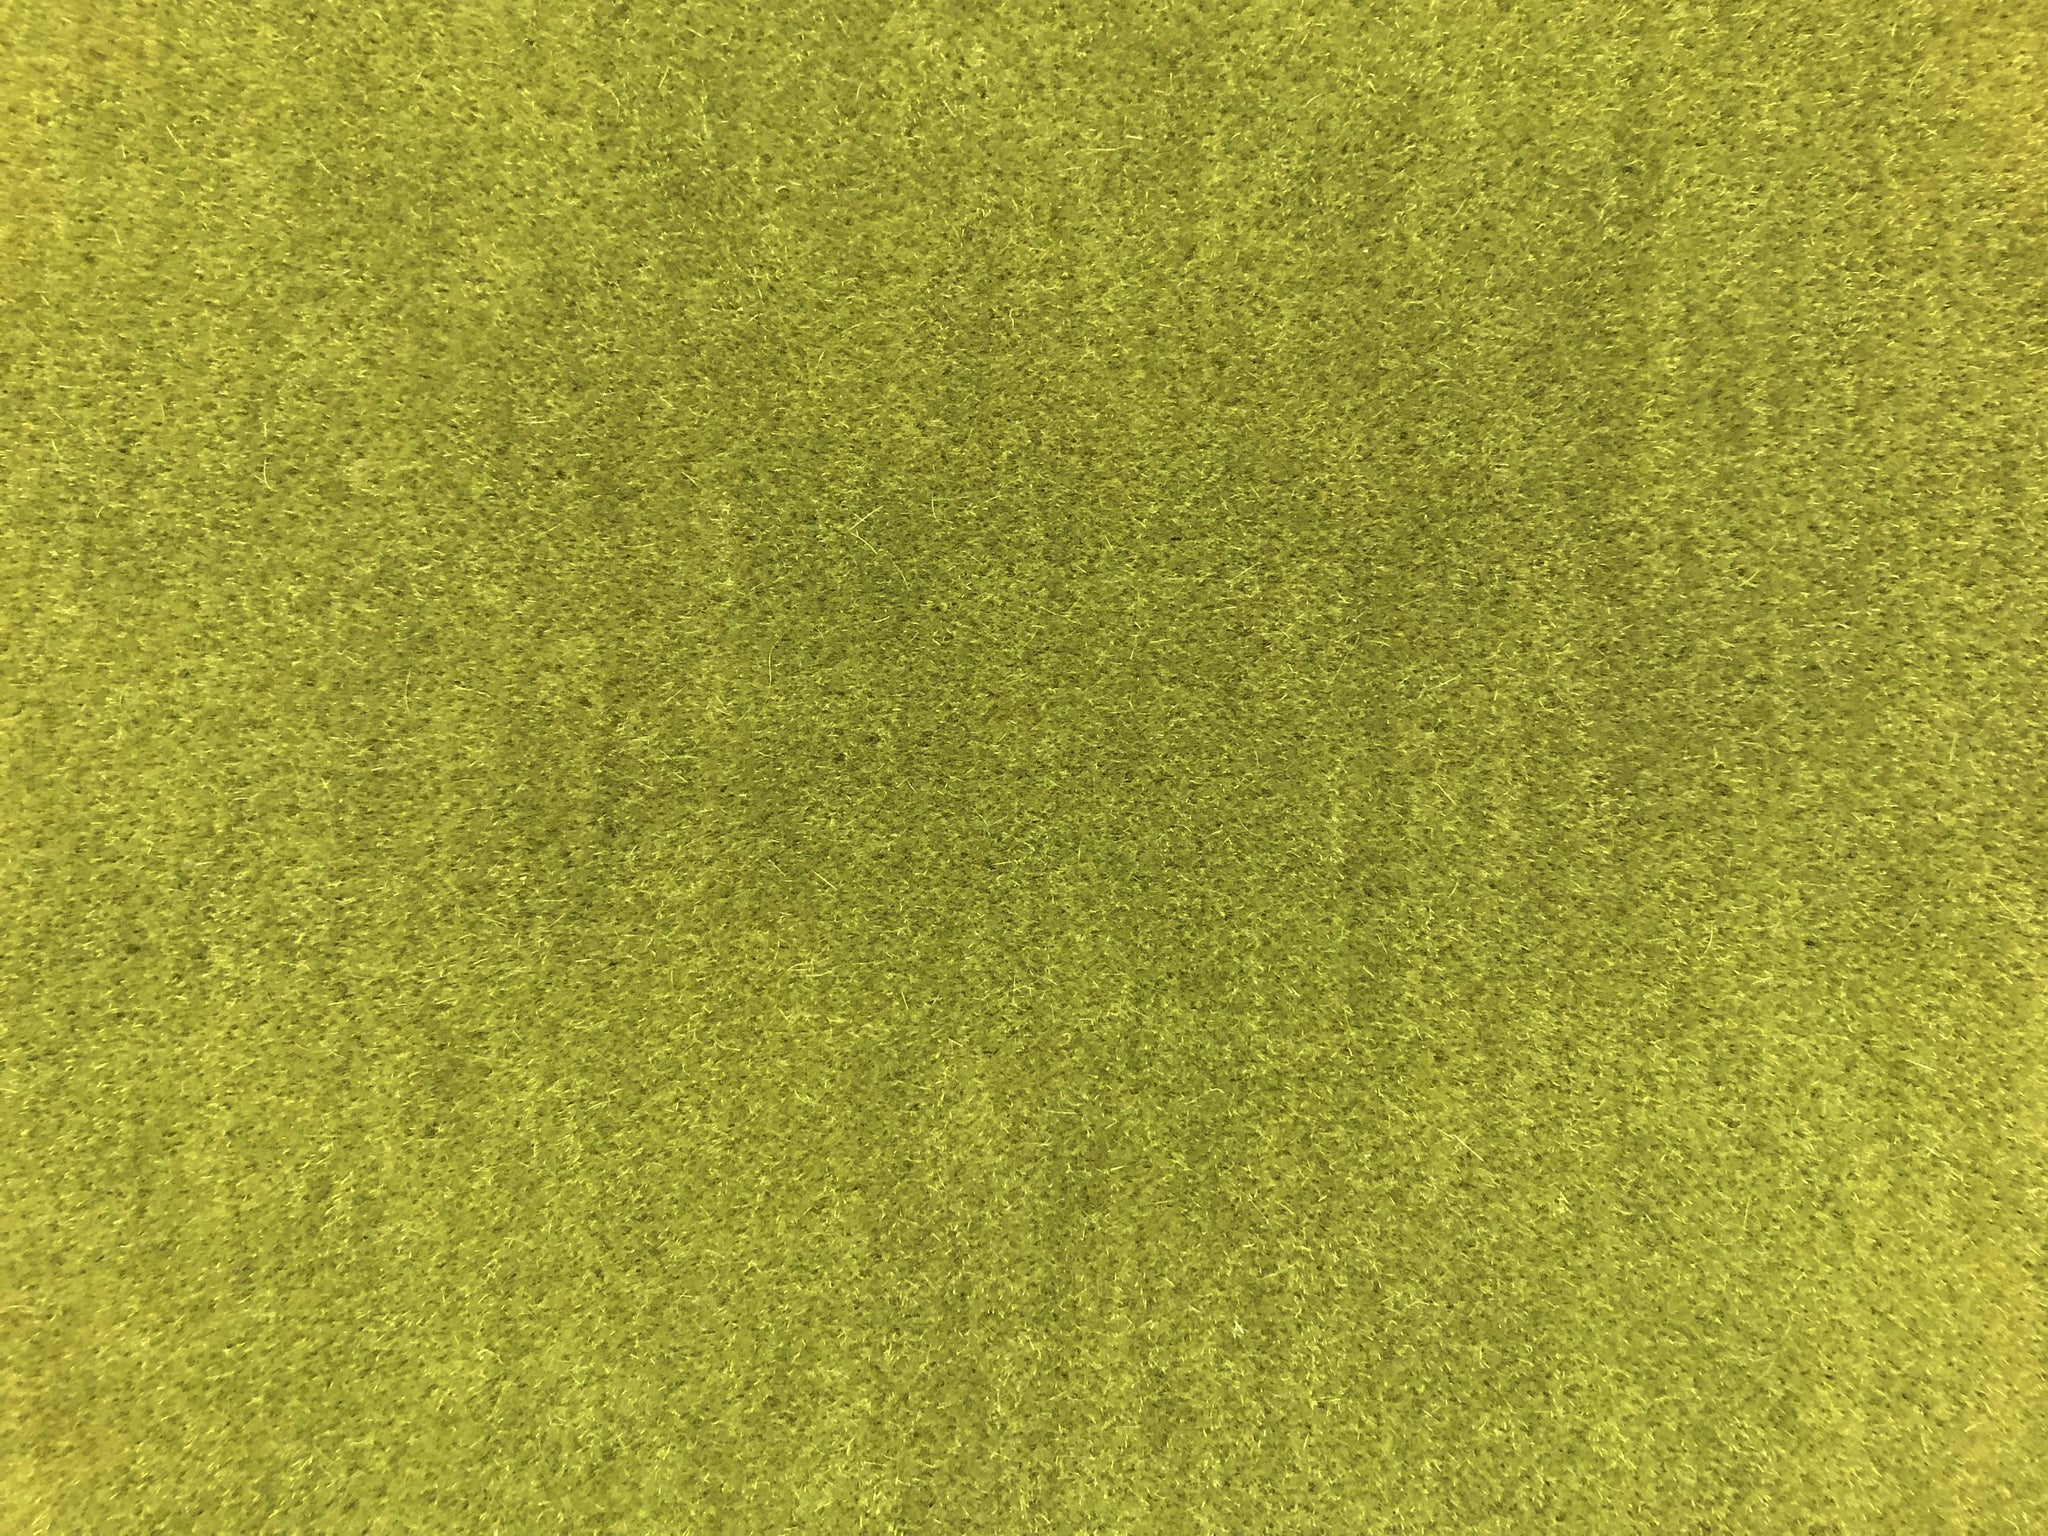 Luxurious 100% Mohair Velvet Thick Heavy Weight Upholstery Fabric by the  Yard, Solid Olive Green 390 Sofa Chair Headboard Upholstery 54w 